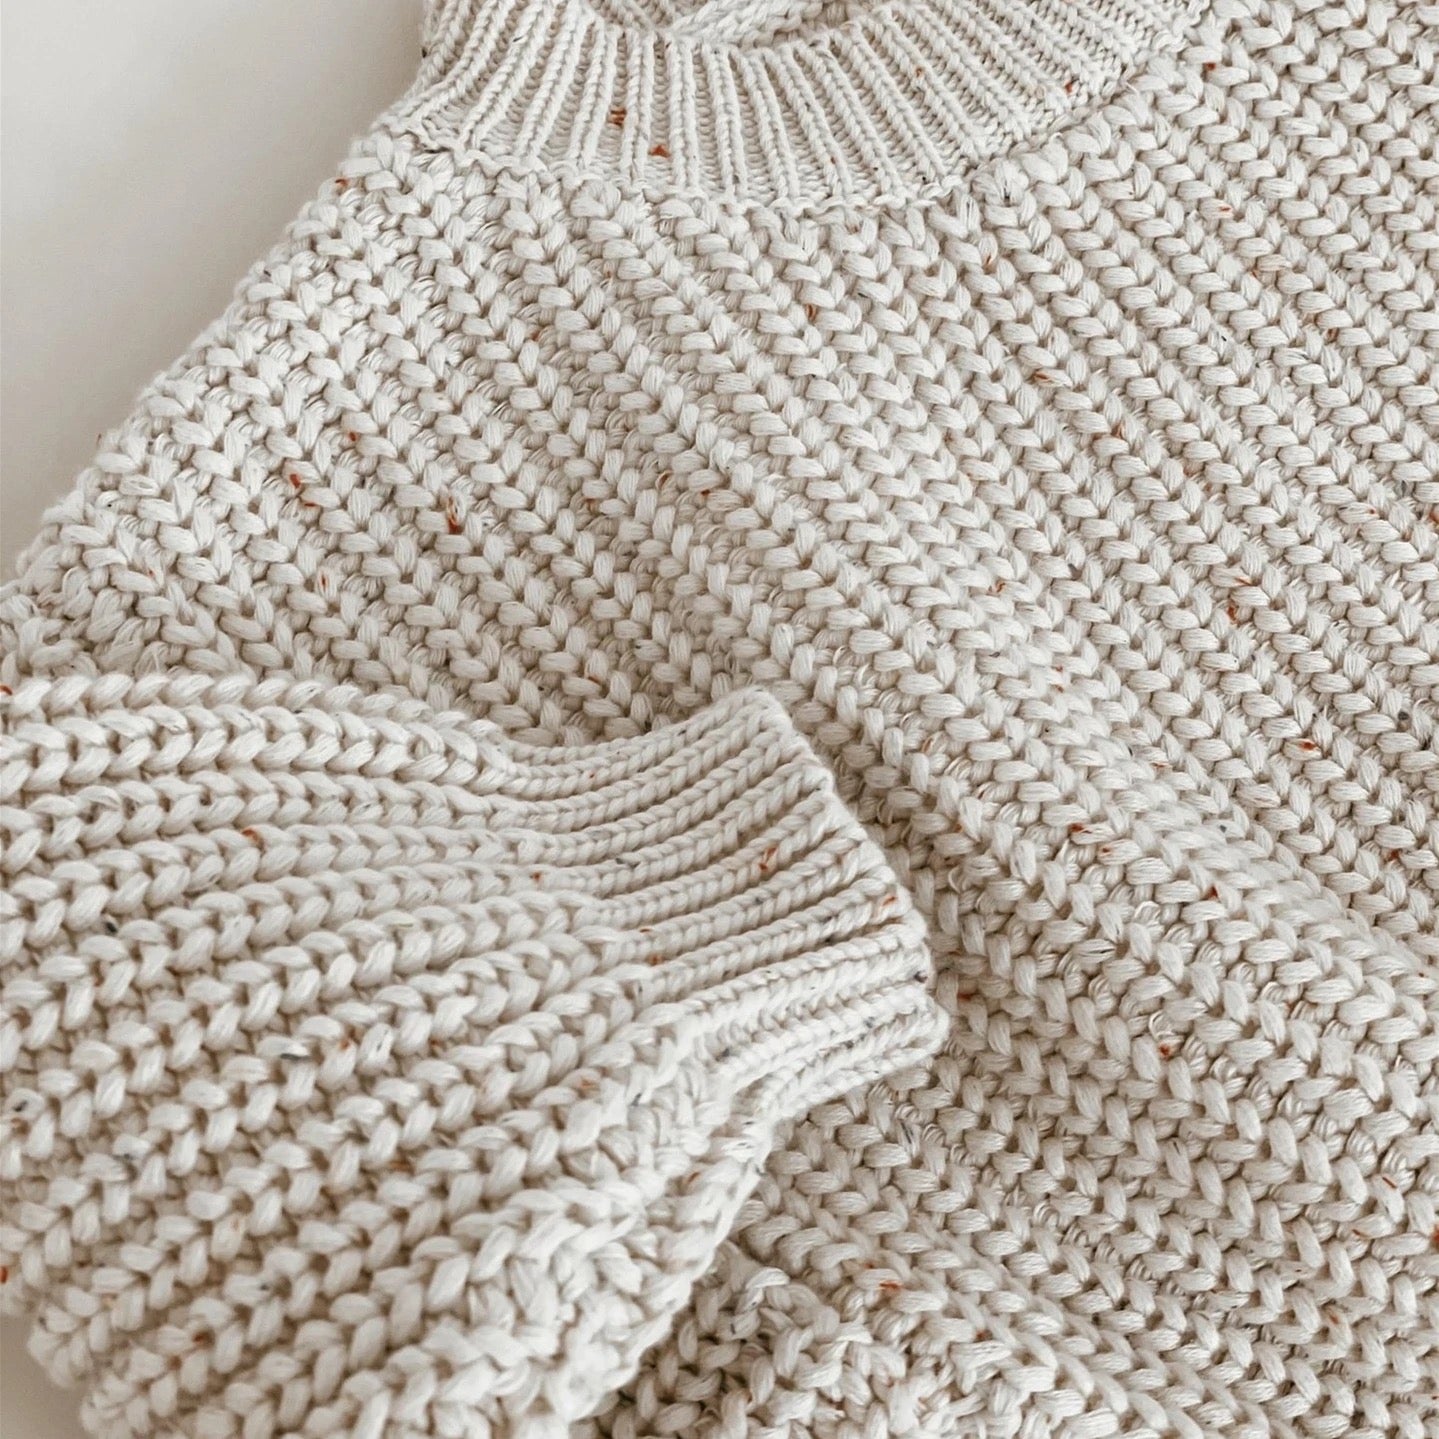 Beige knitted baby sweater